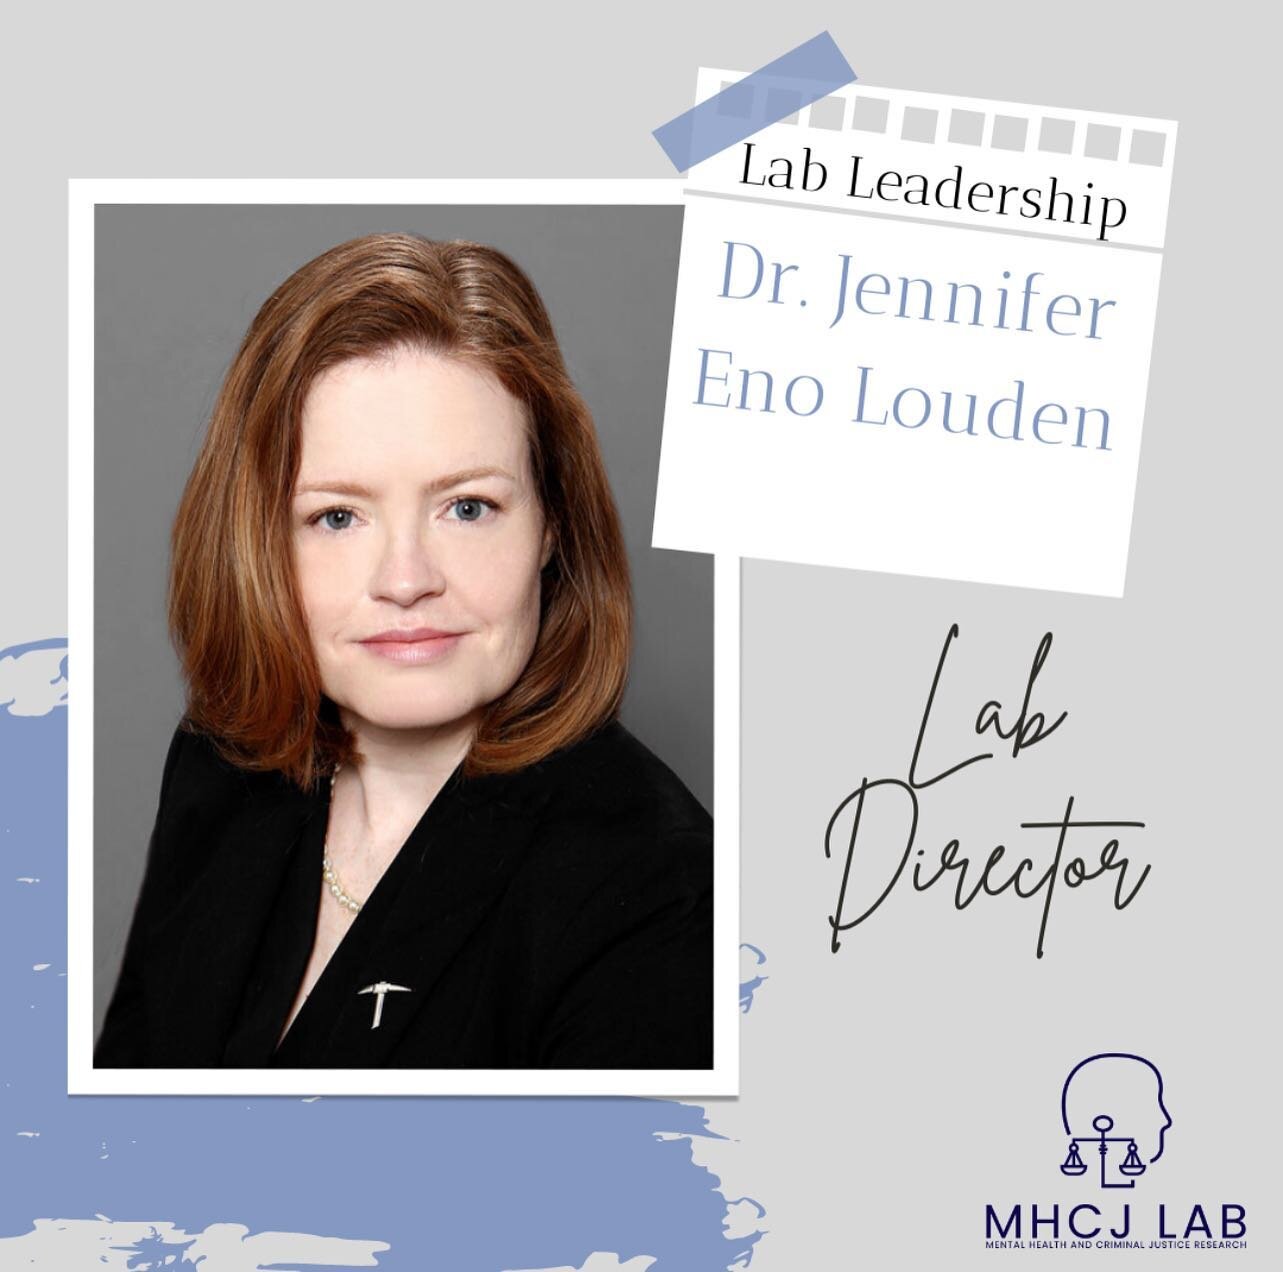 We would like to introduce our very own Lab Director: Dr. Jennifer Eno Louden 

Dr. Eno Louden received her doctoral degree in Psychology and Social Behavior from the University of California at Irvine in 2009. Dr. Eno Louden founded the MHCJ Lab in 